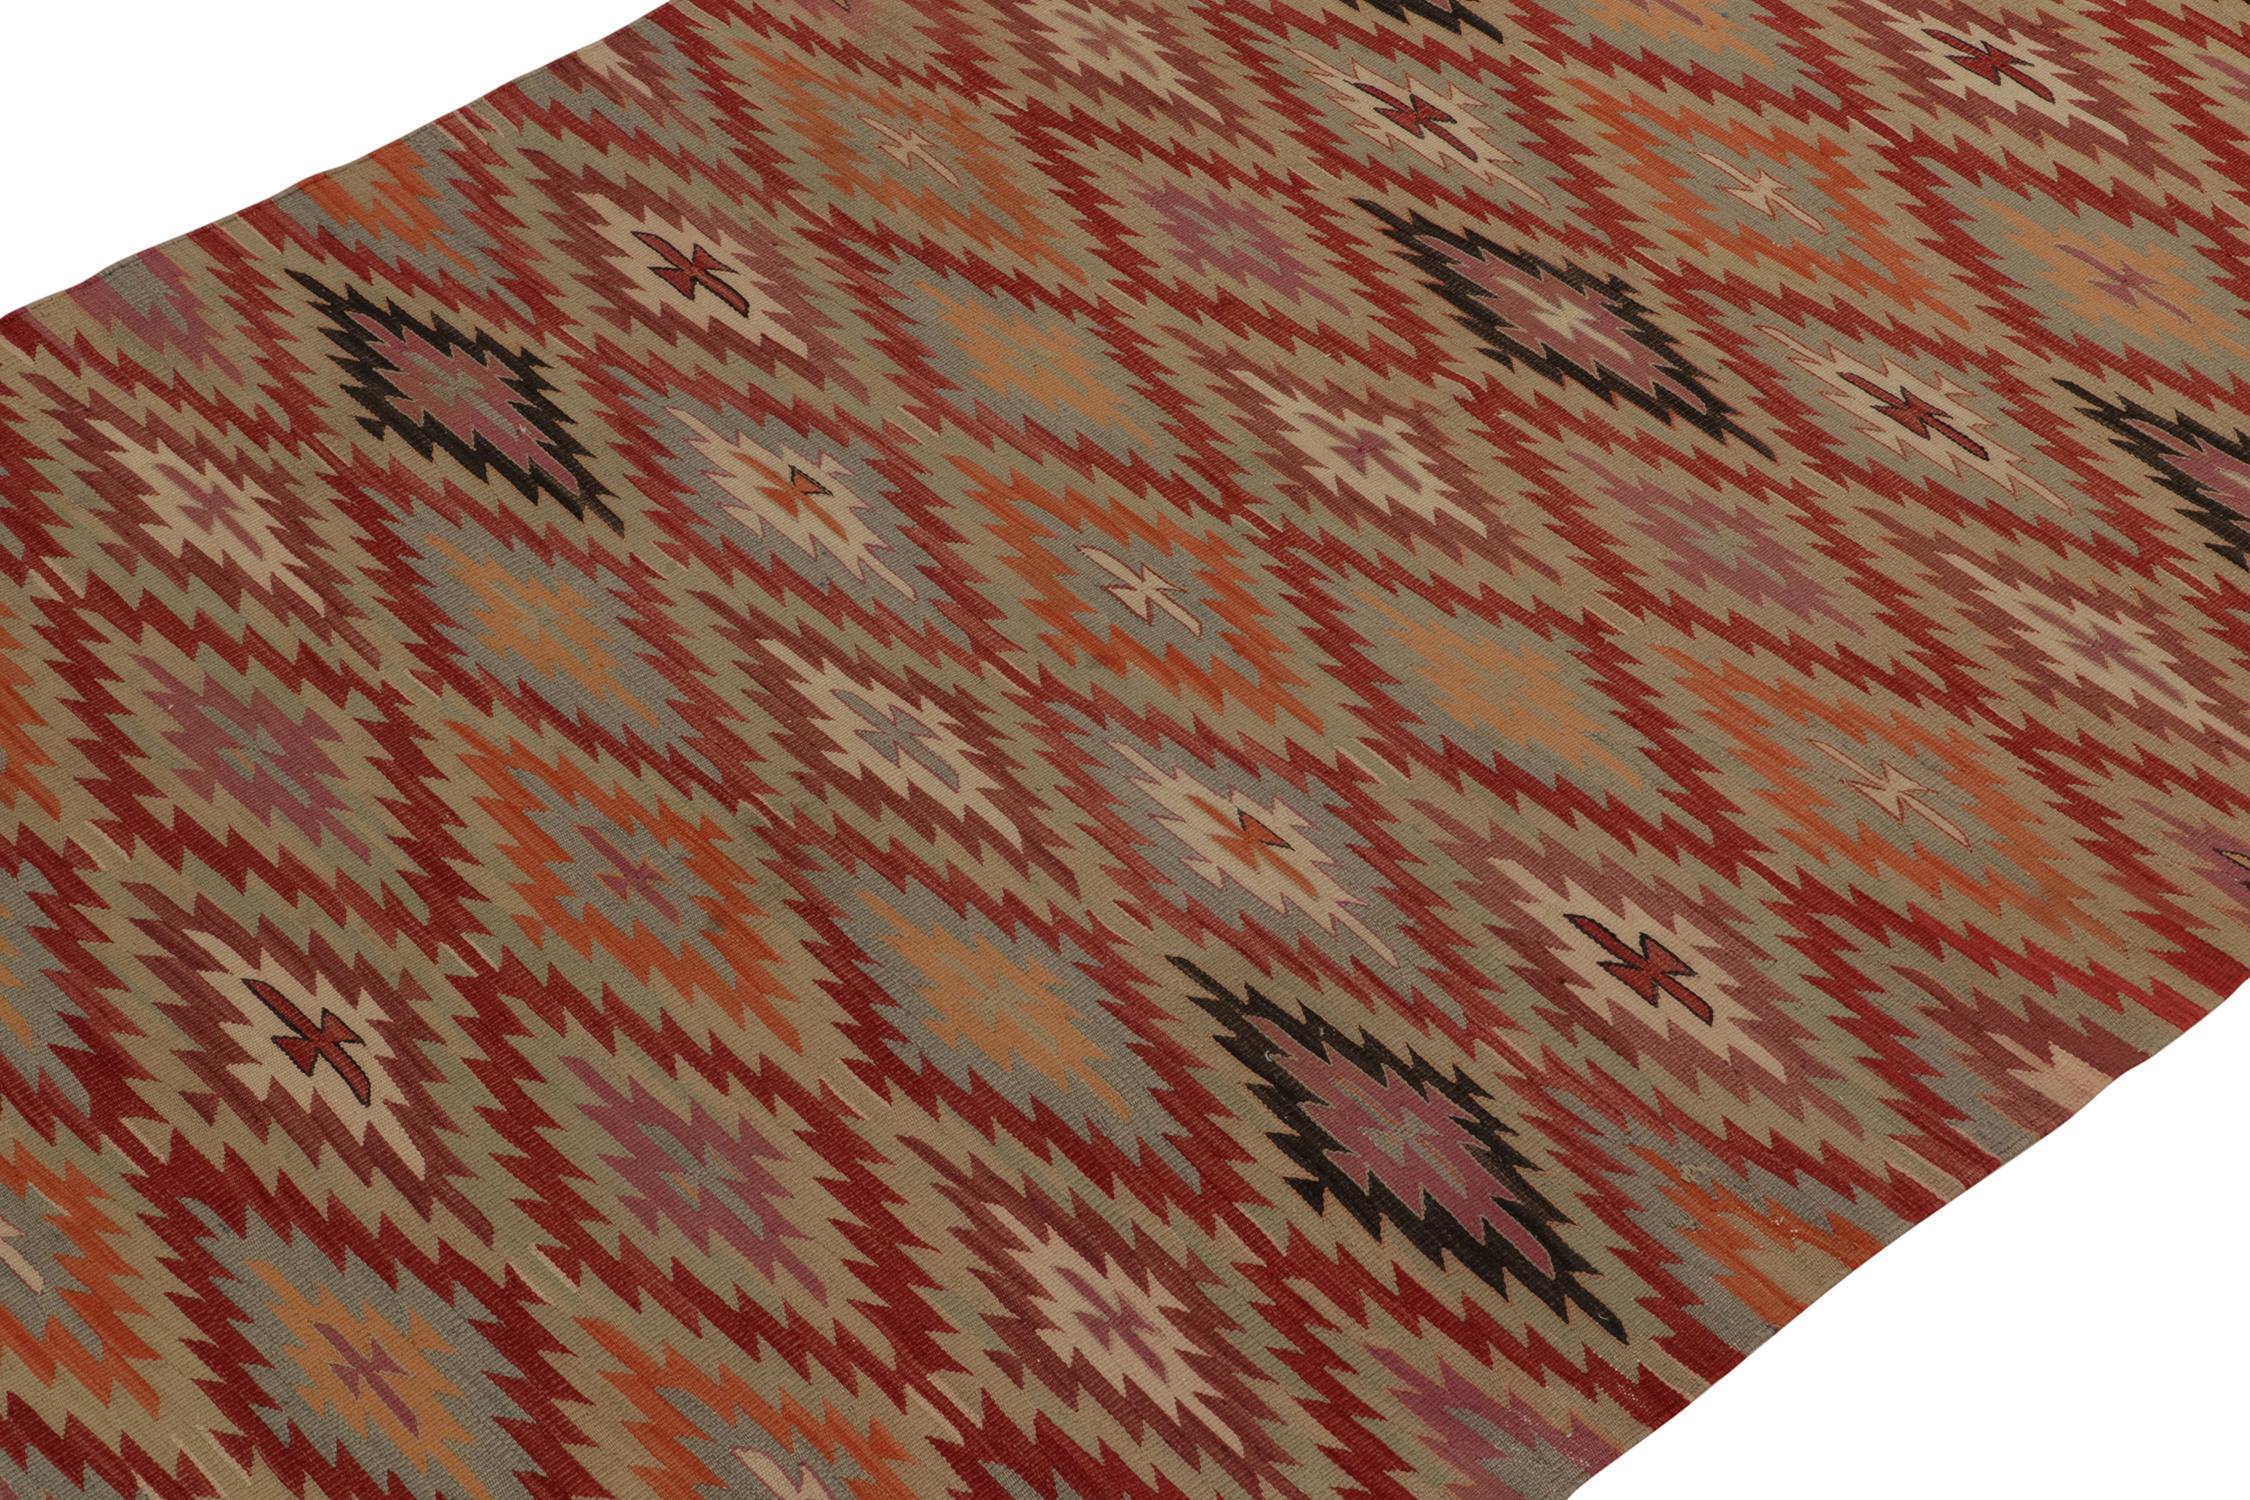 Hand-Woven Vintage Tribal Kilim rug in Red, Orange and Blue Geometric patterns For Sale